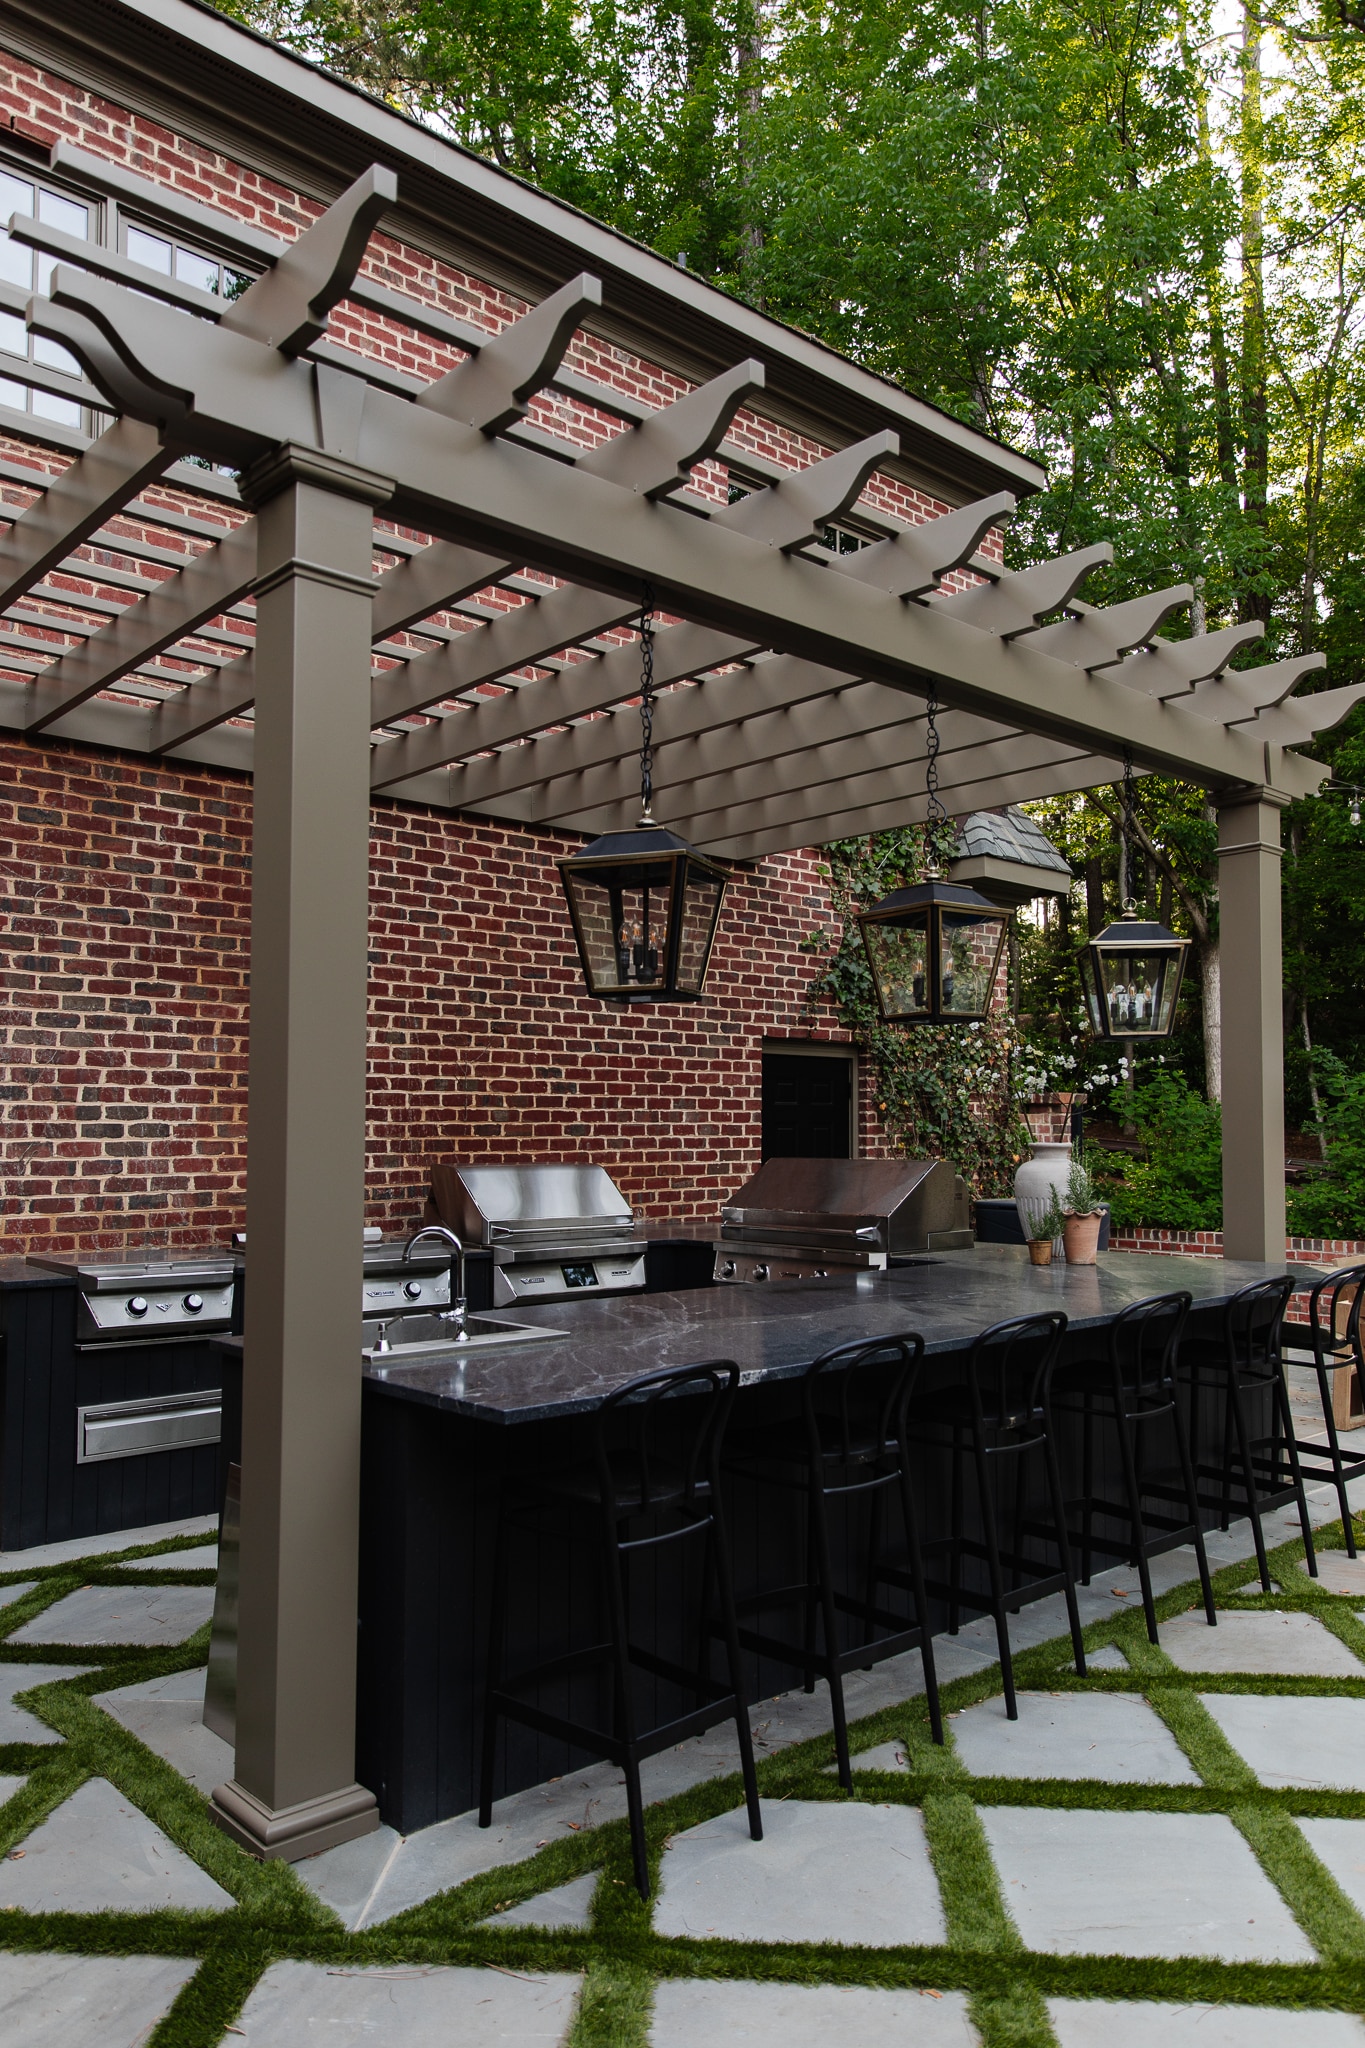 Chris Loves Julia | Outdoor Kitchen with Pergola Painted in Cromwell Gray, a Moody Brown Color